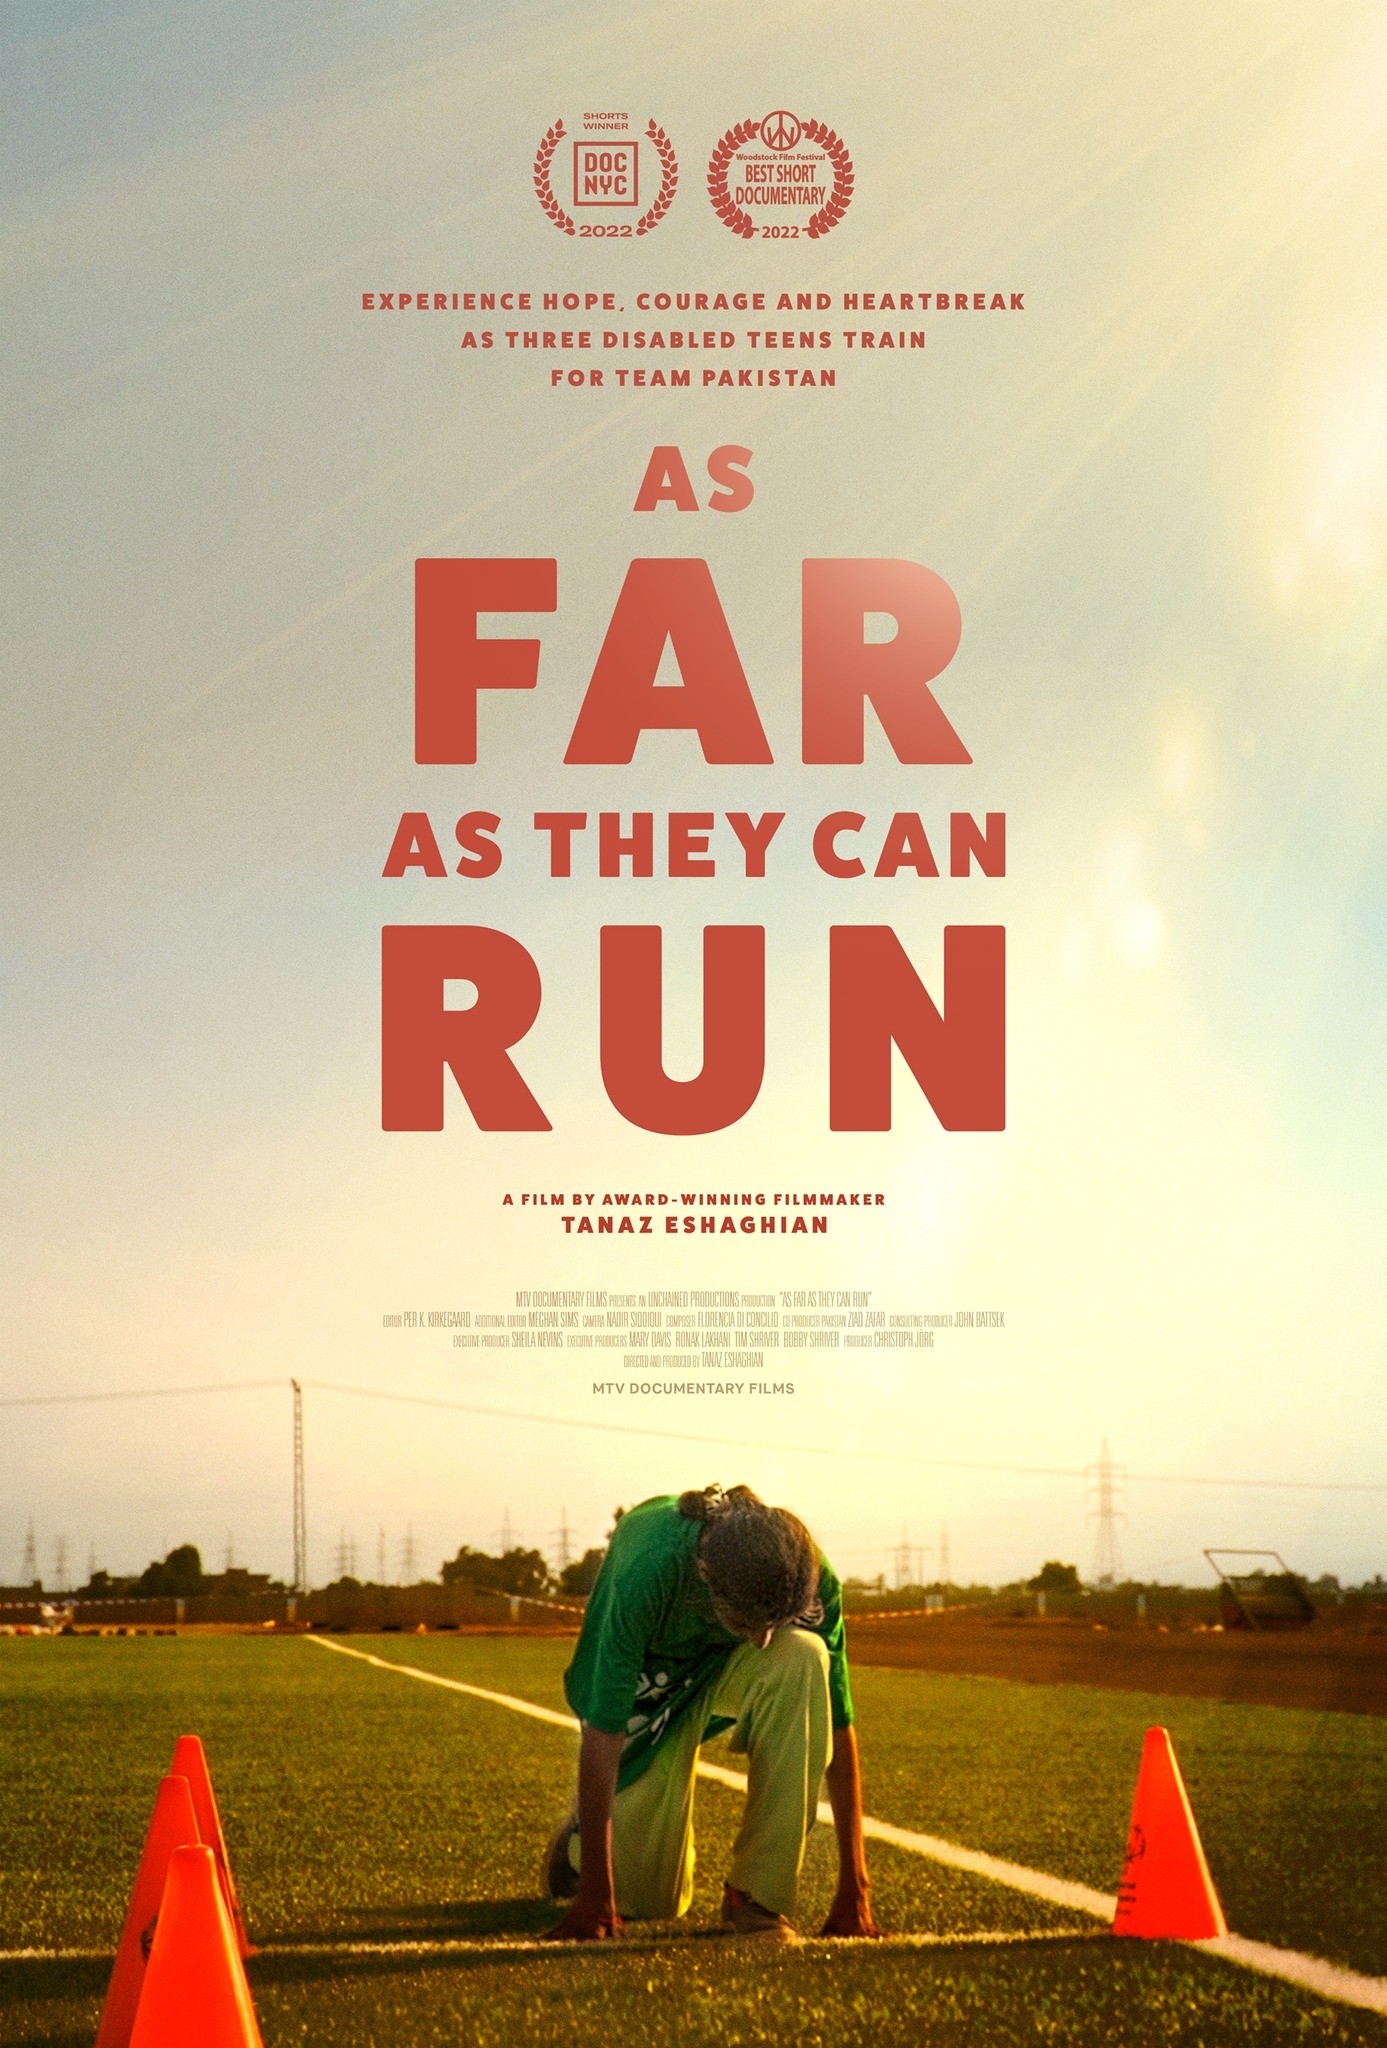 Mega Sized Movie Poster Image for As Far As They Can Run